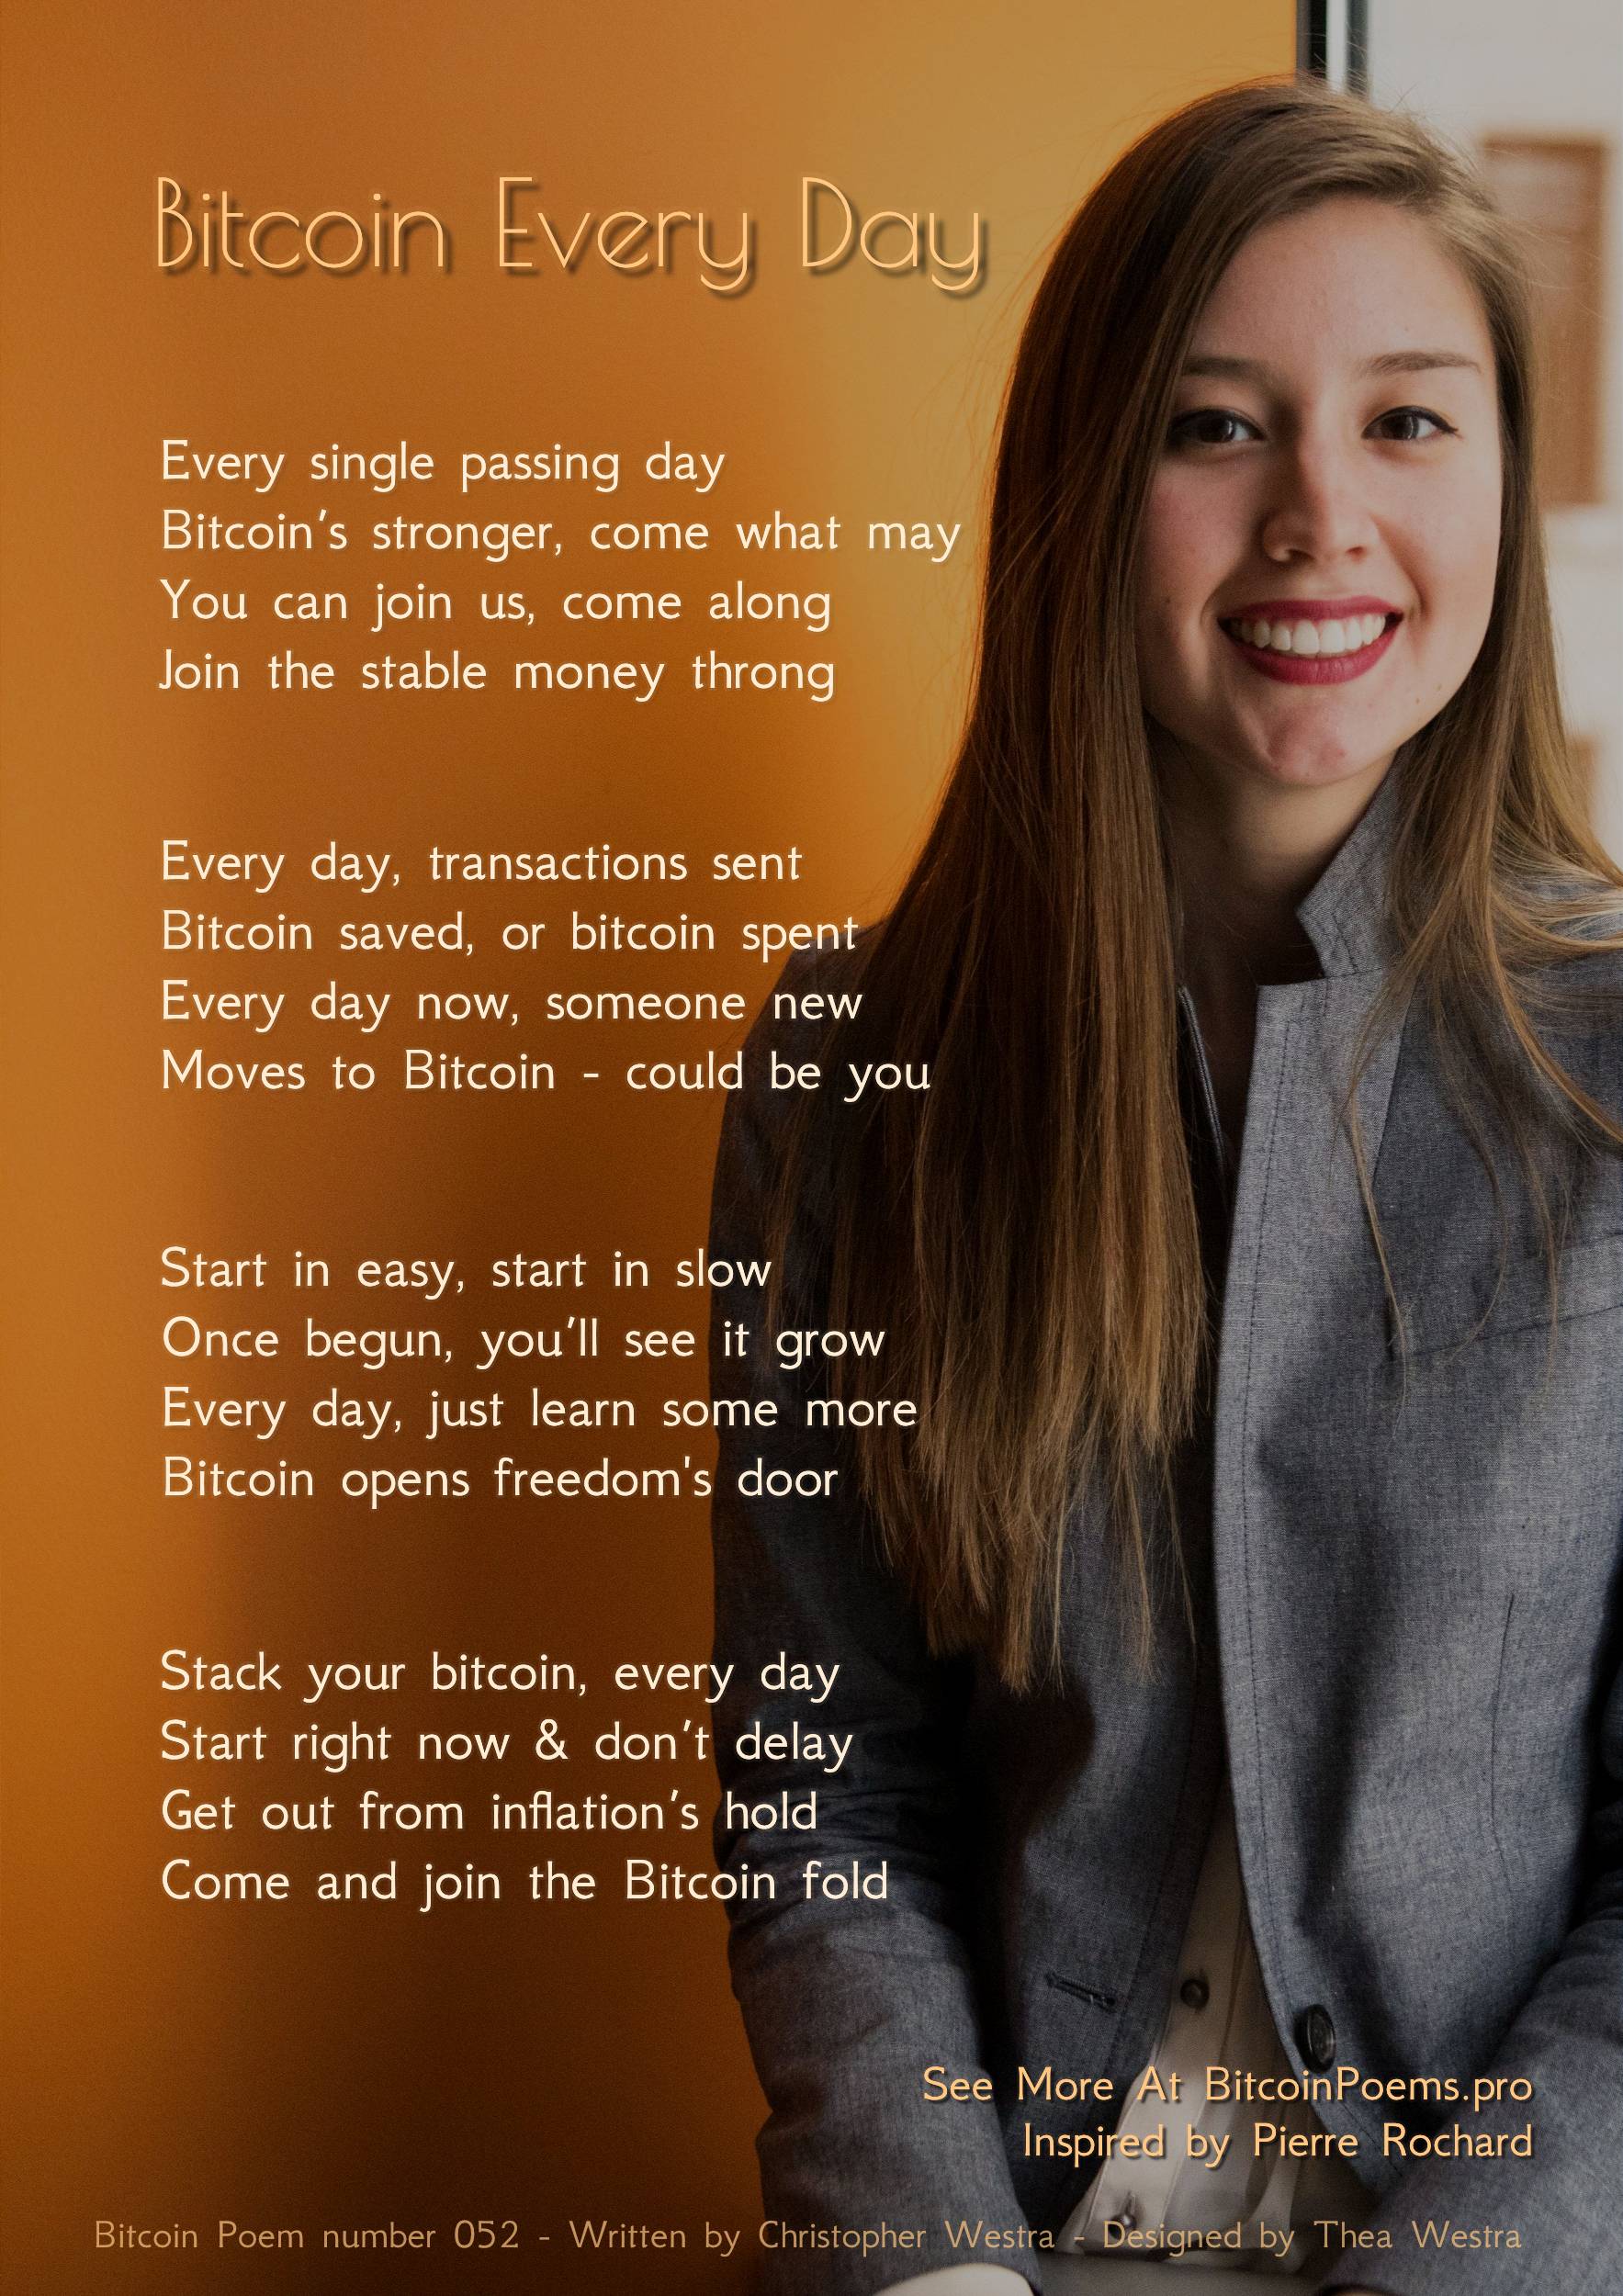 Bitcoin Every Day - Bitcoin Poem 052 by Christopher Westra